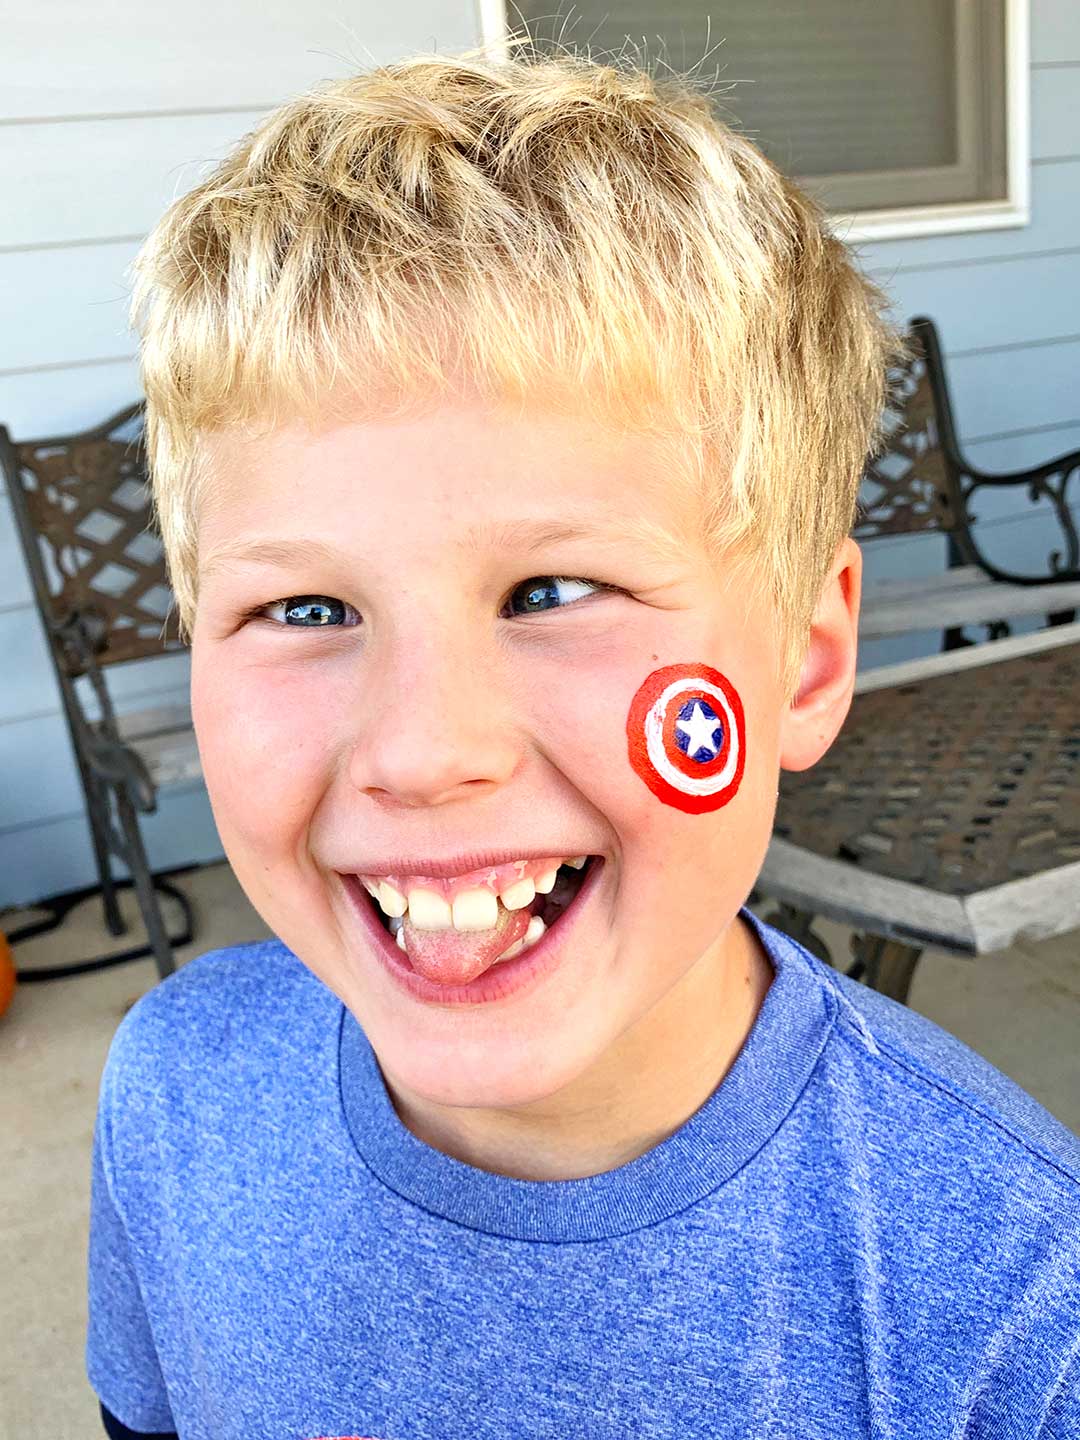 Boy with blonde hair with Captain America shield face painted on cheek making silly face.